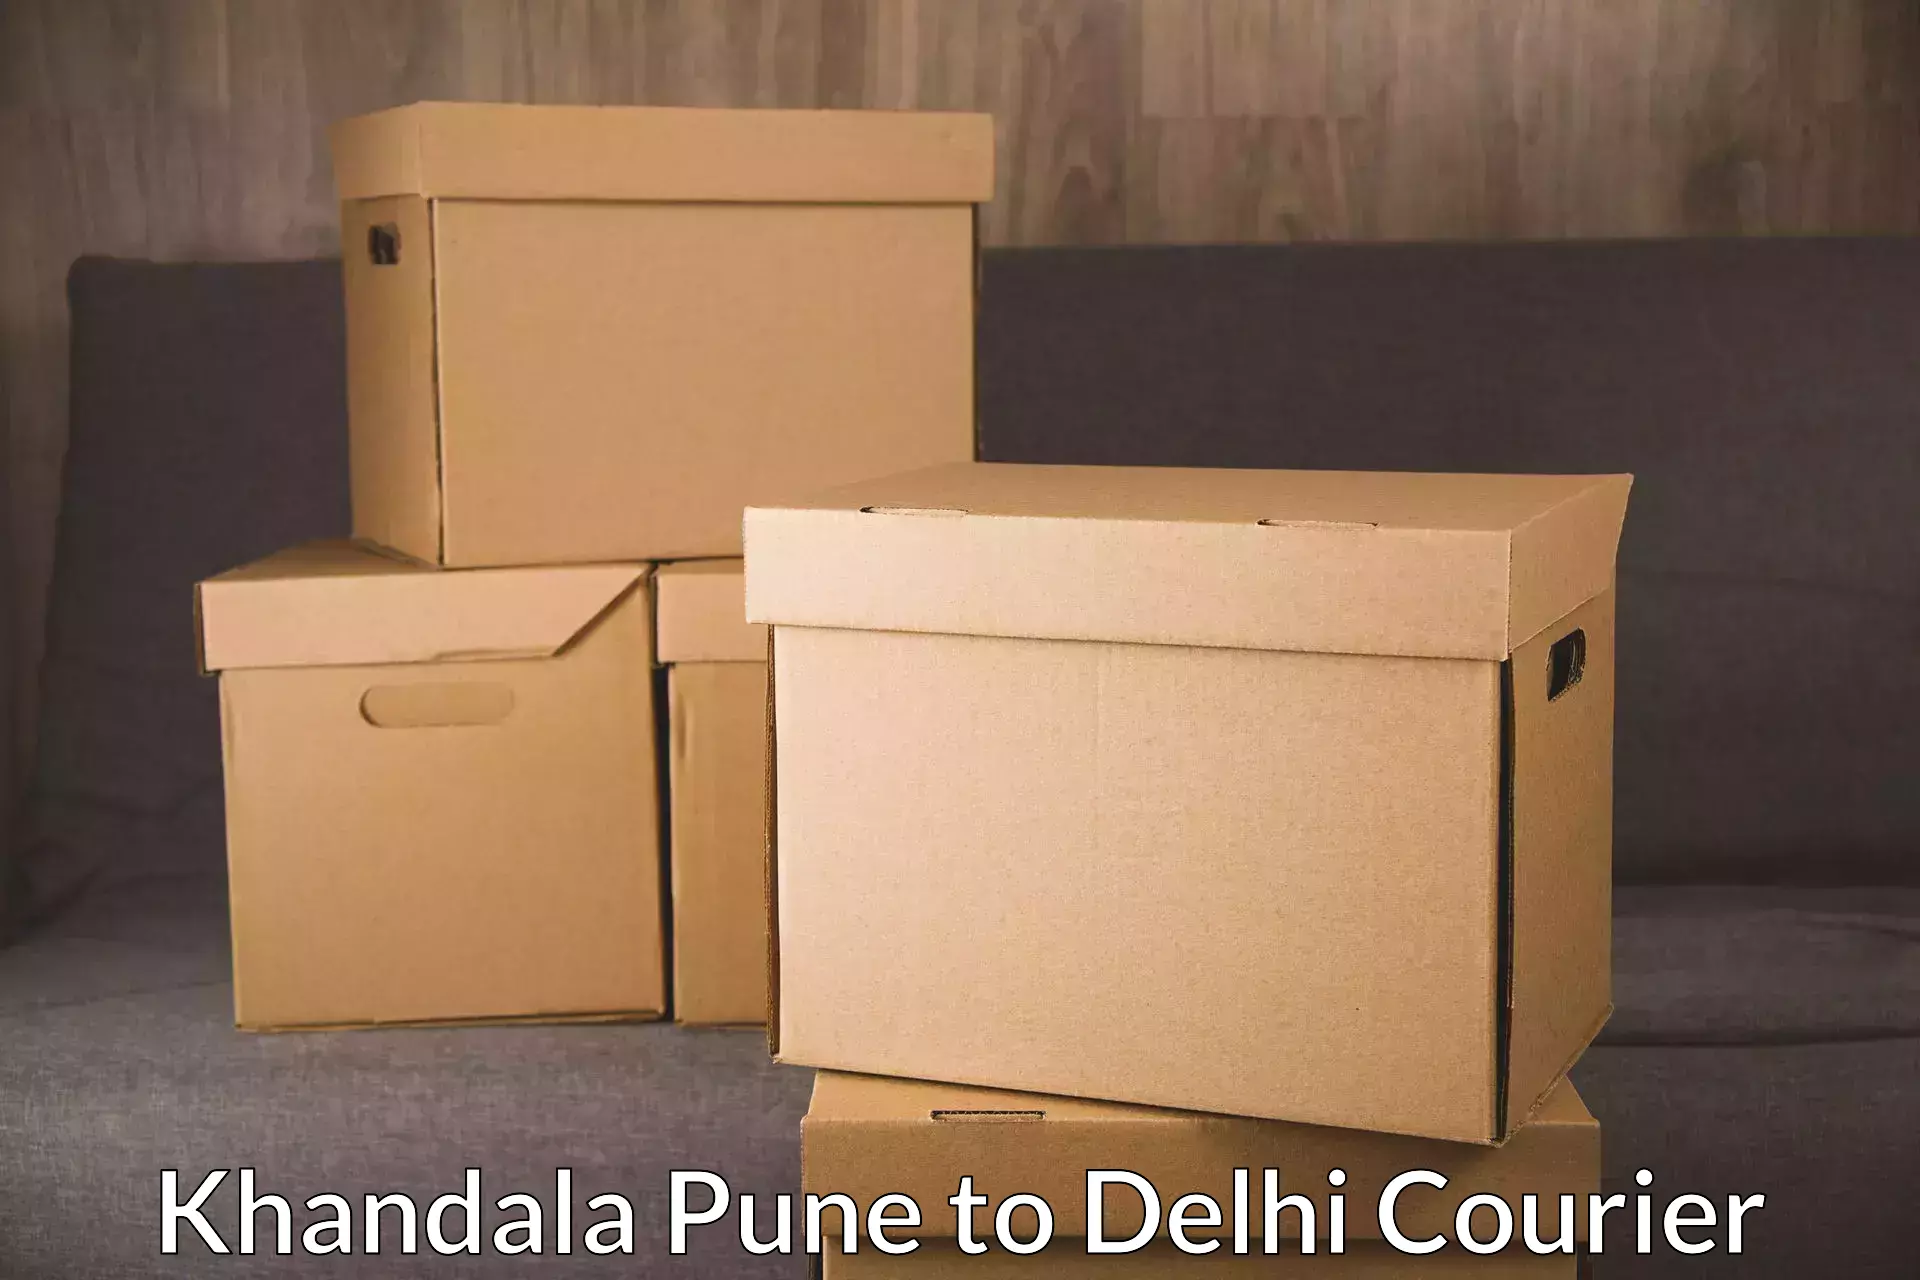 Reliable delivery network Khandala Pune to Delhi